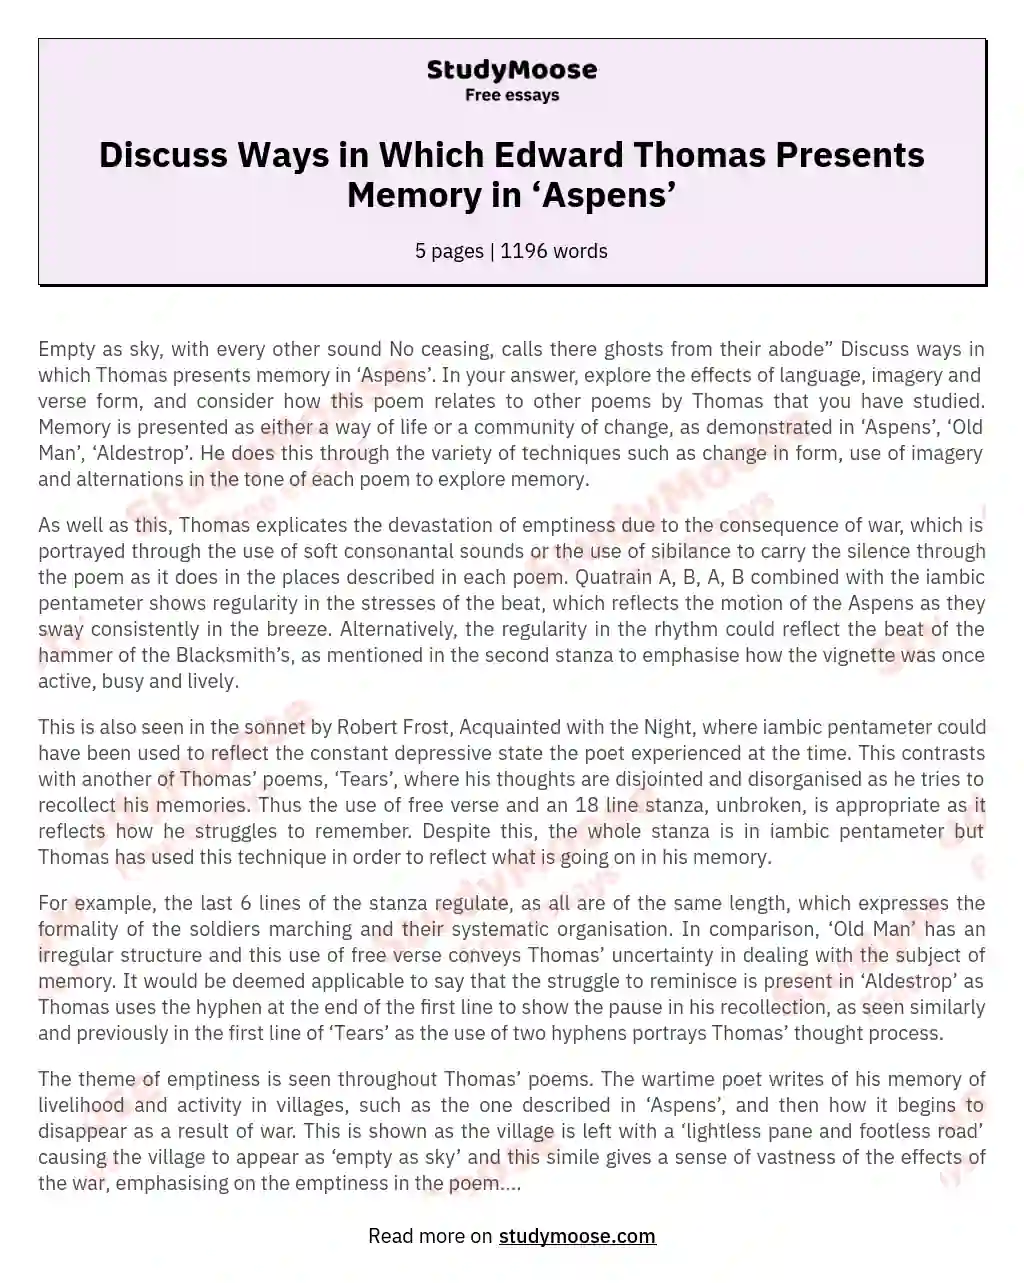 Discuss Ways in Which Edward Thomas Presents Memory in ‘Aspens’ essay